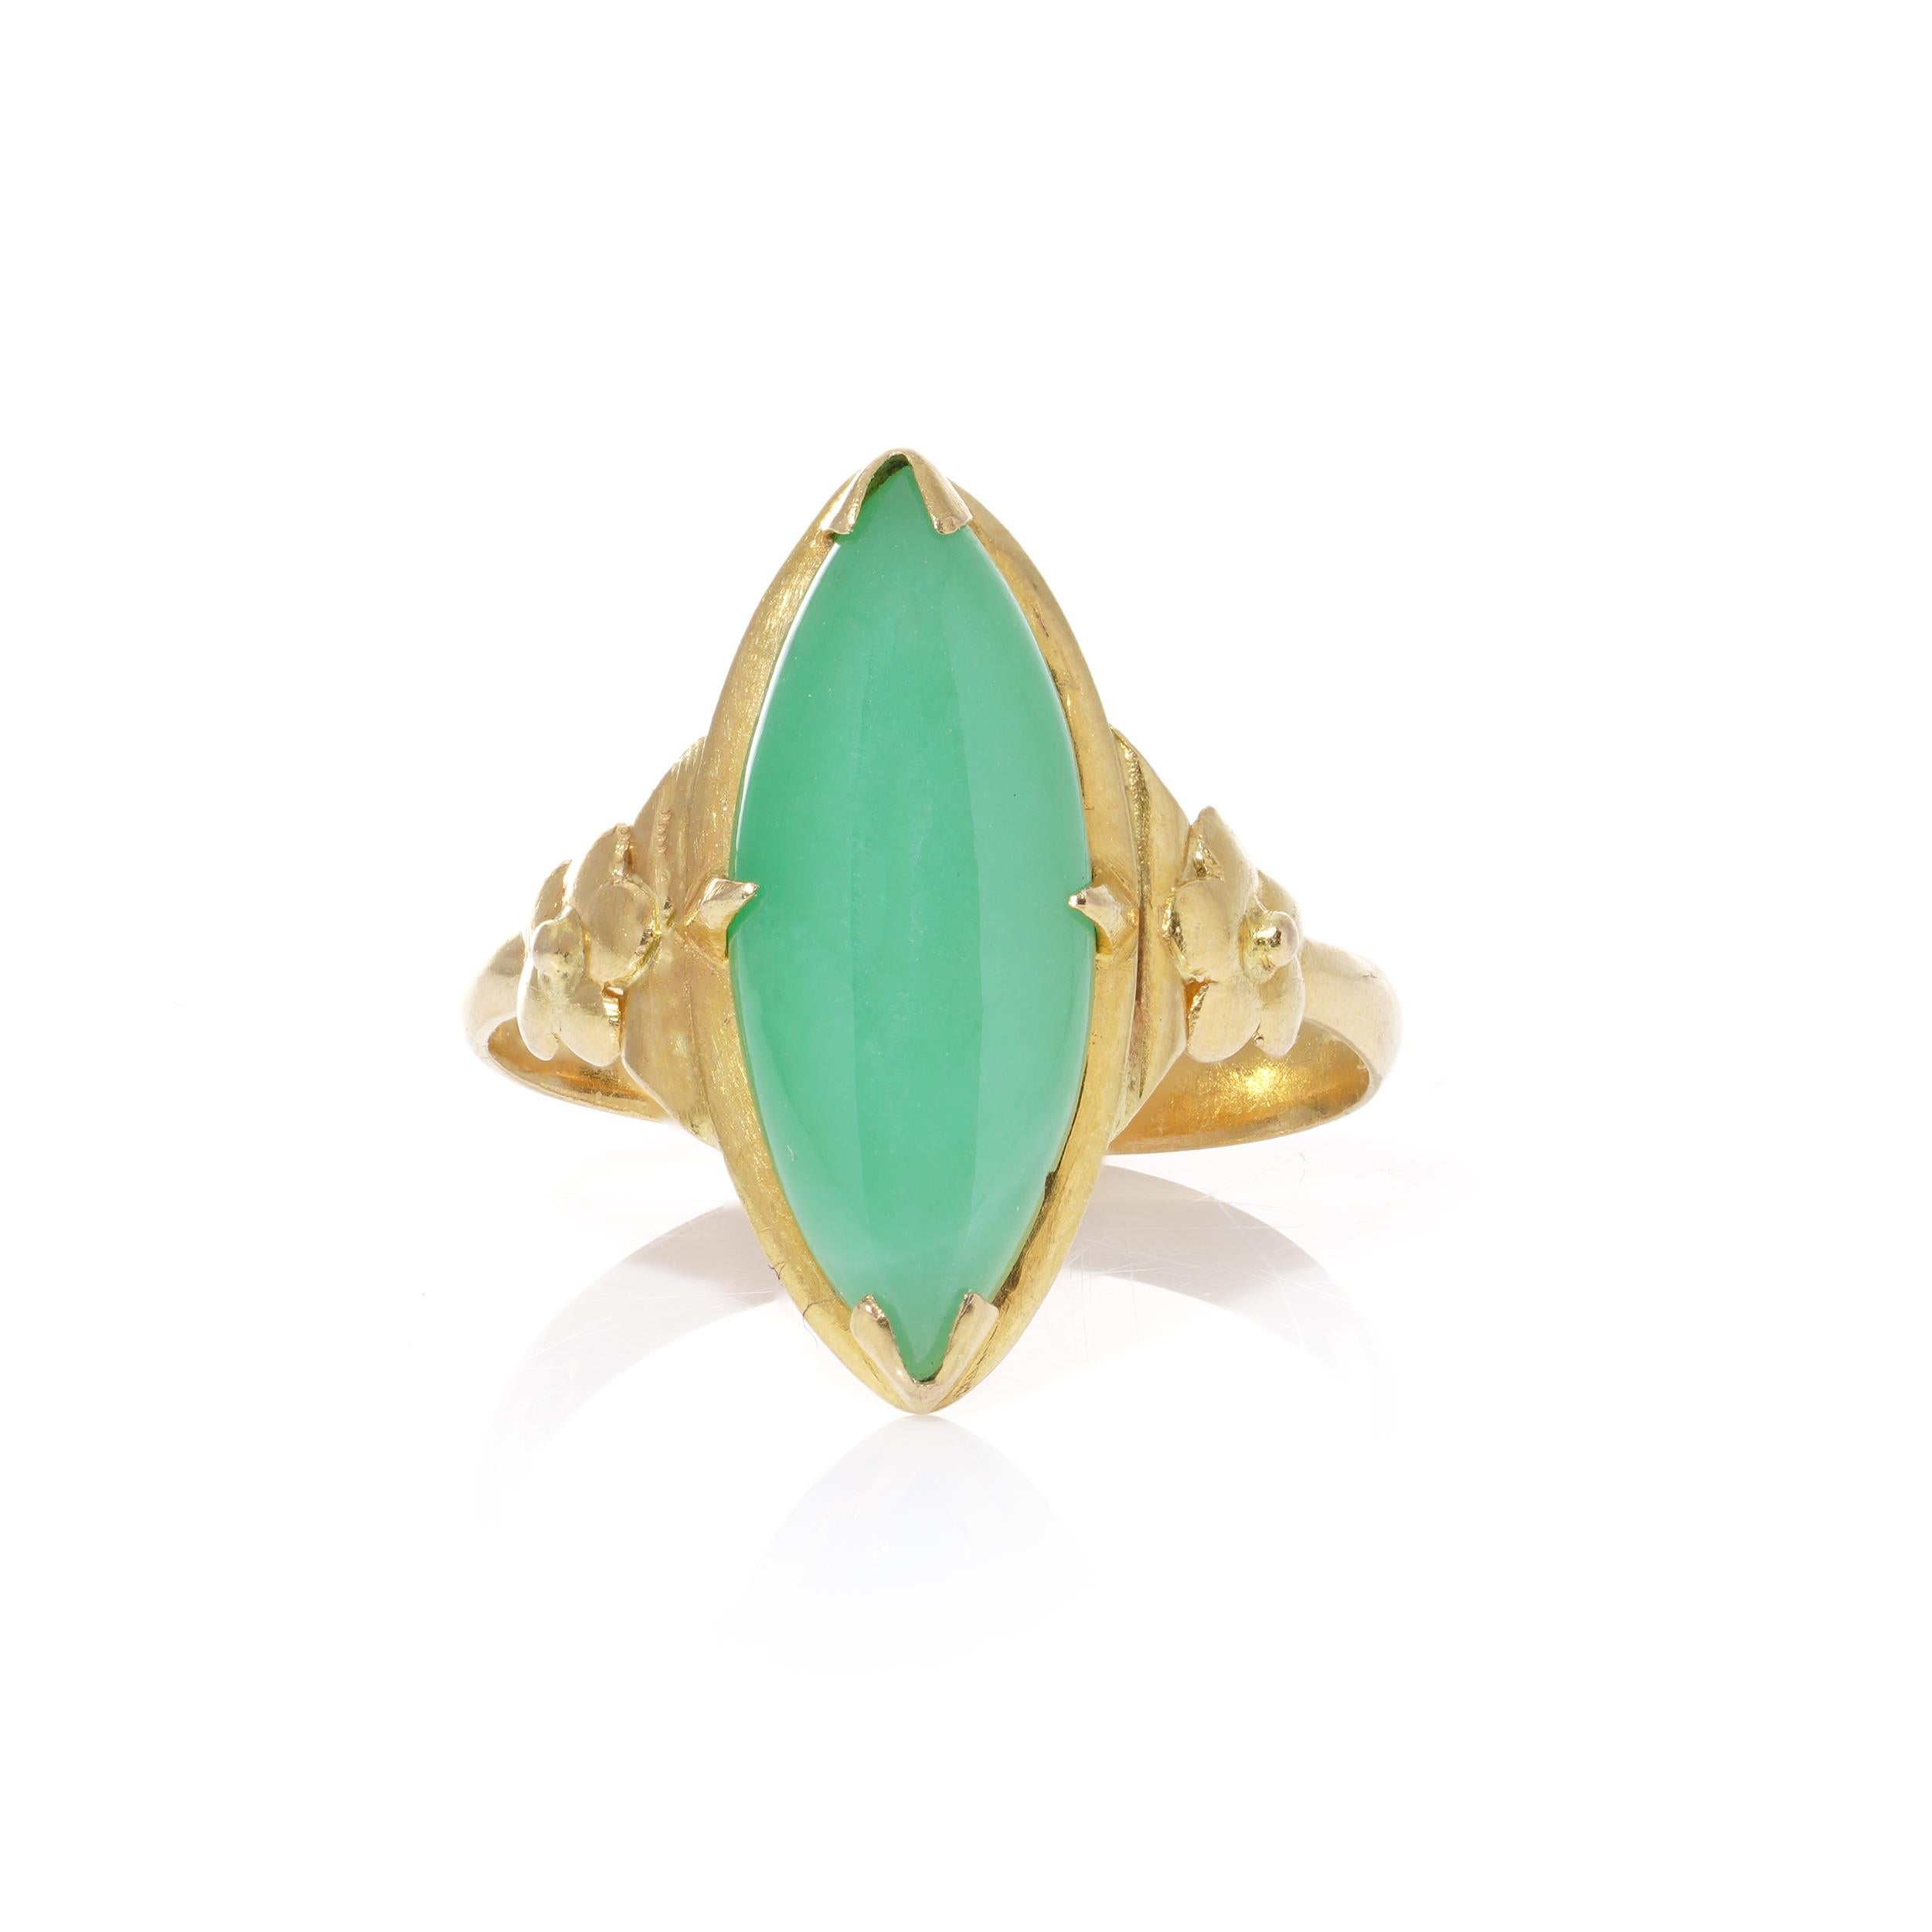 Vintage 21kt. yellow gold marquise cut jade ring. 
Made in Circa. 1990's 
X - Ray been tested positive for 21kt. gold.
Bearing Chinese characters. 

Dimensions:
Finger Size (UK) = M - N  (US) = 6.5 - 7 EU) = 54 - 55 
Length x width x height: 2.2 x